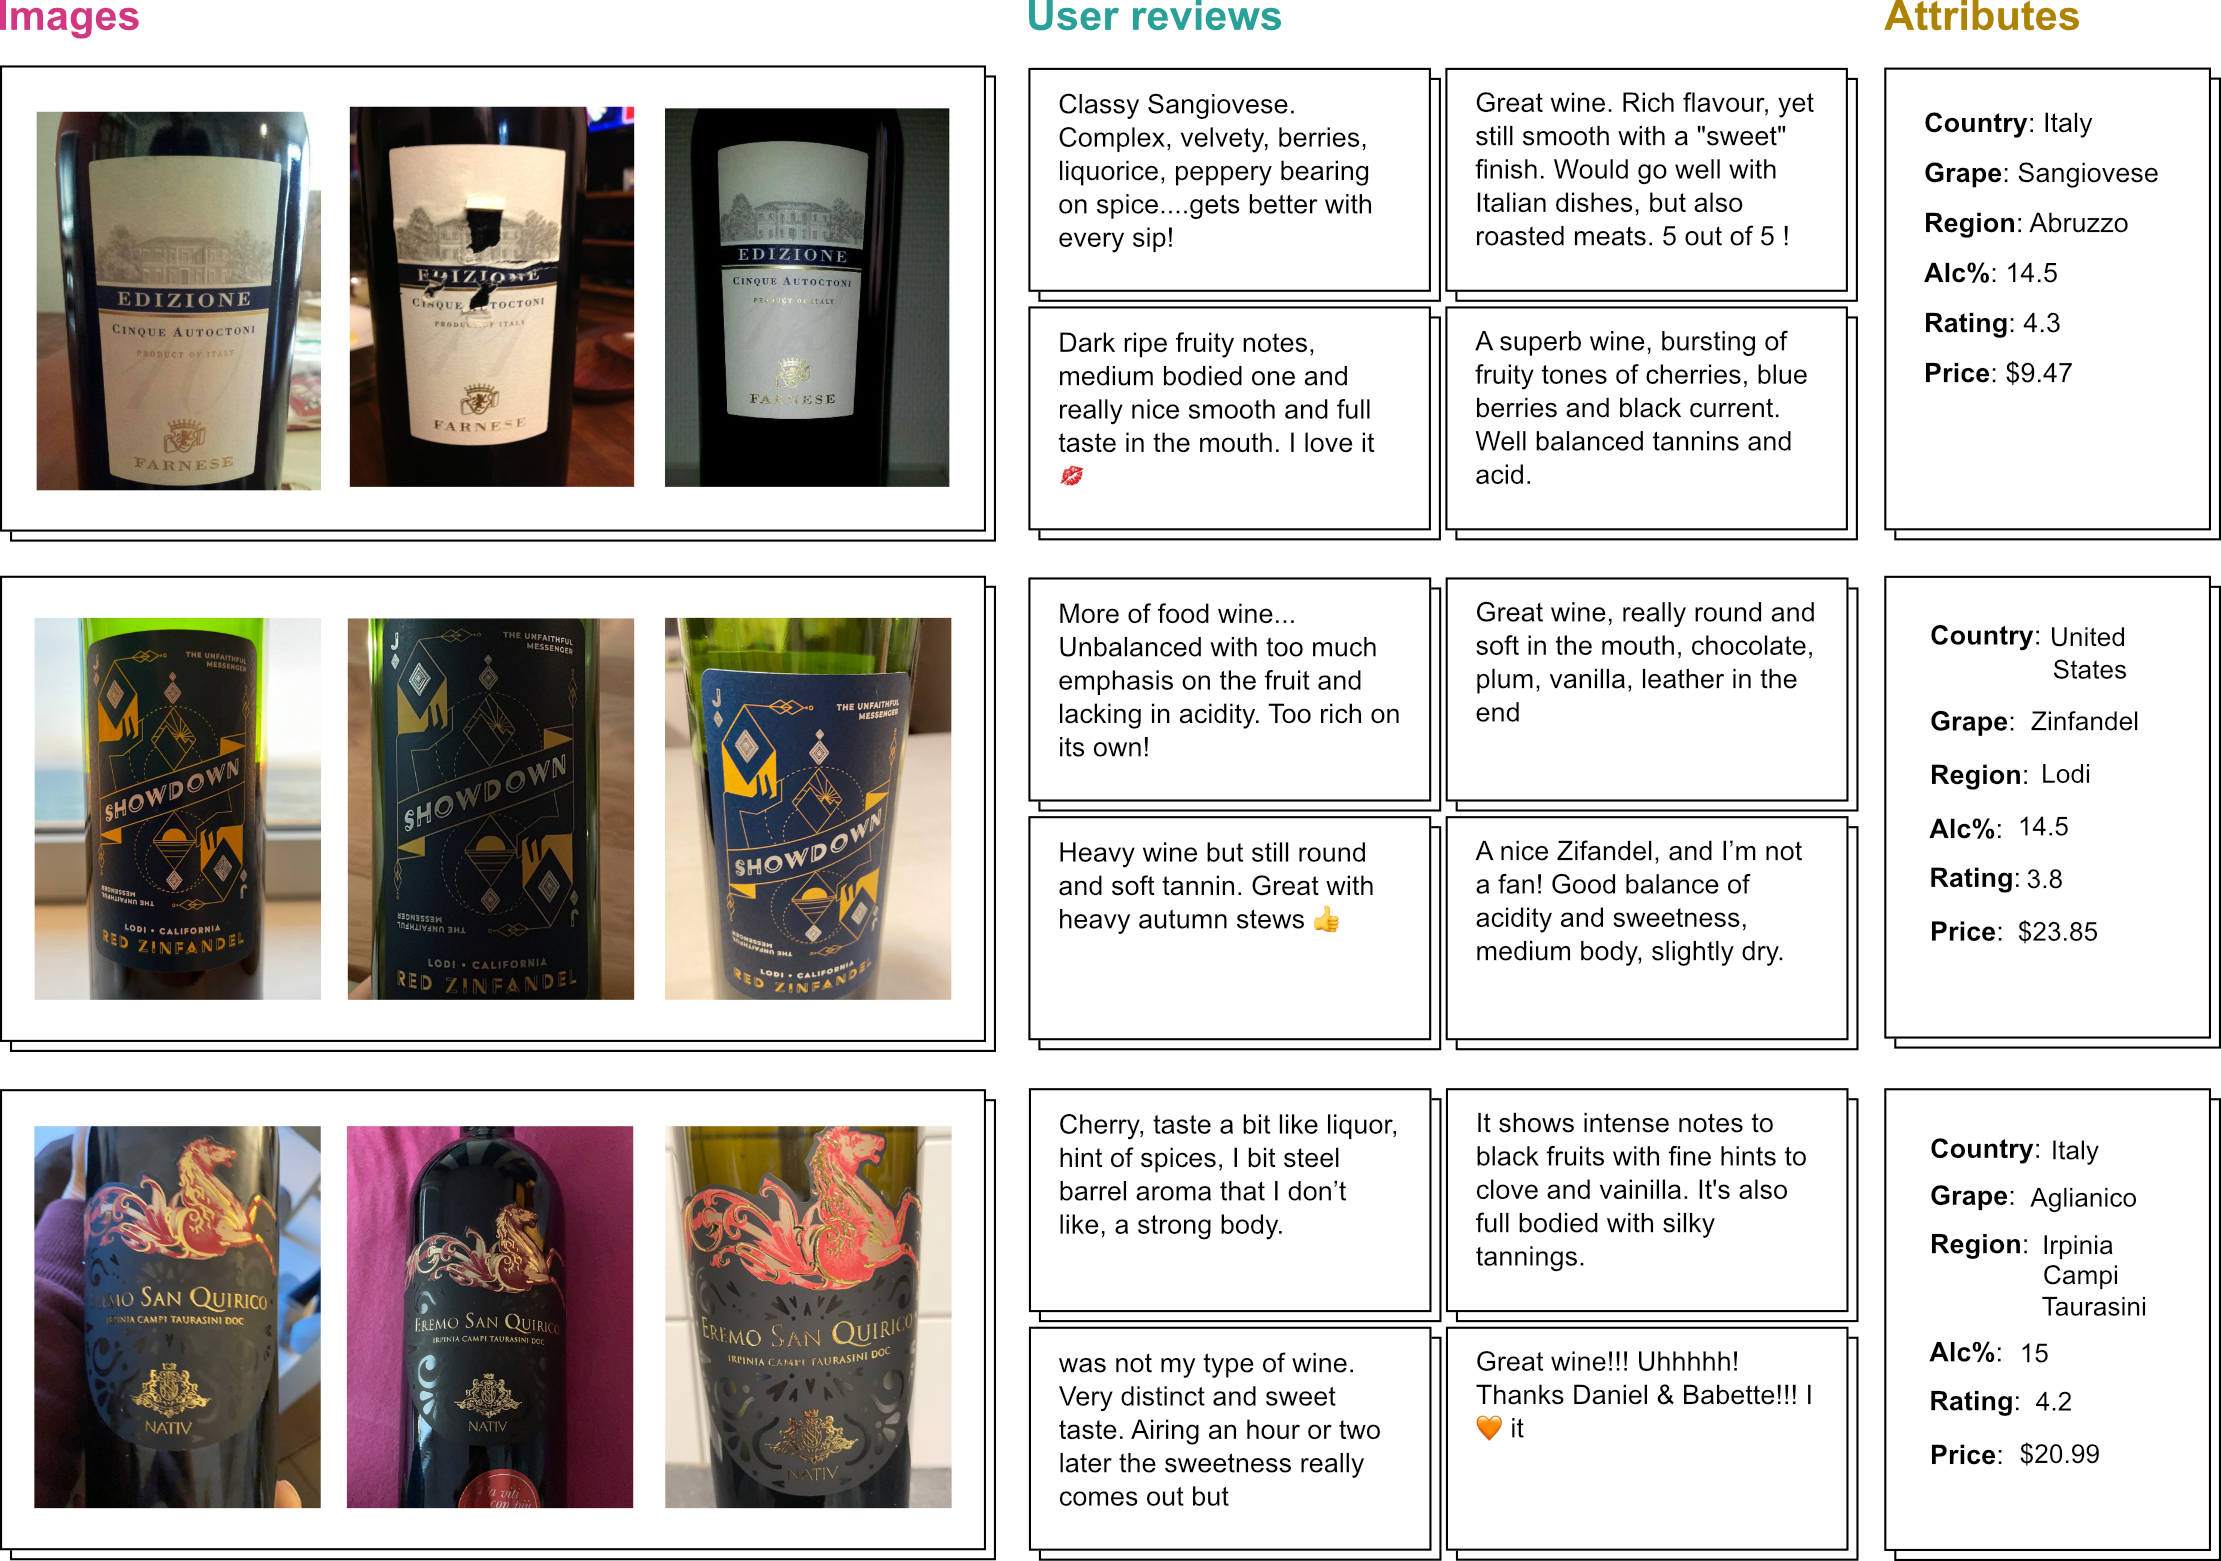 Examples of images, reviews, and attributes from the WineSensed dataset